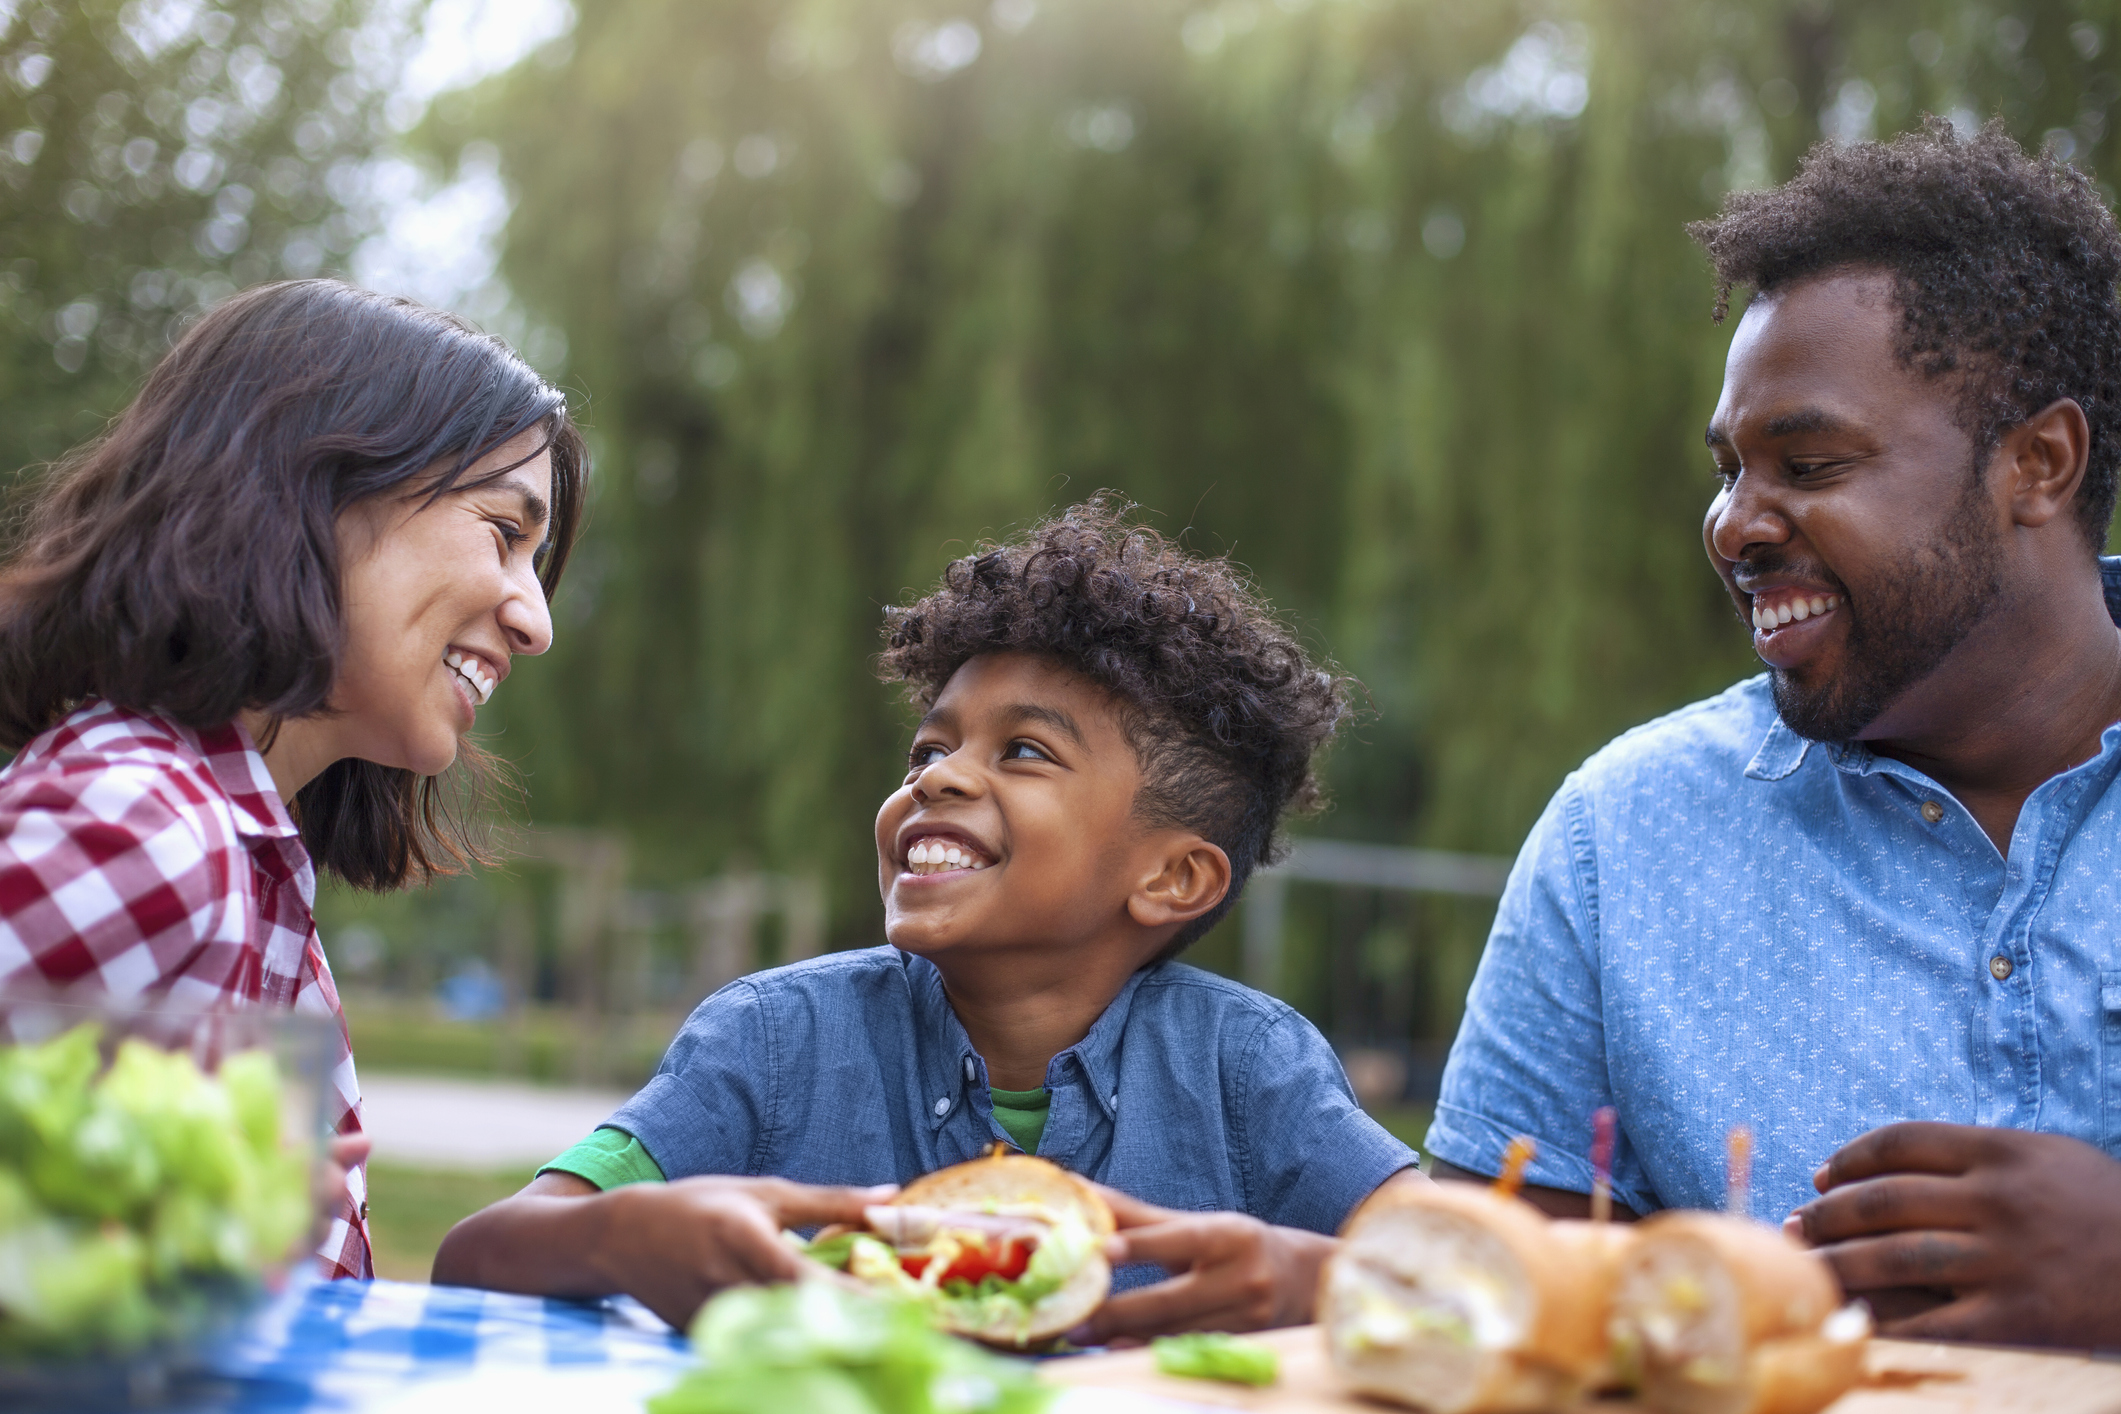 Don’t Let Your Outdoor Meal Become a Feast for Bacteria